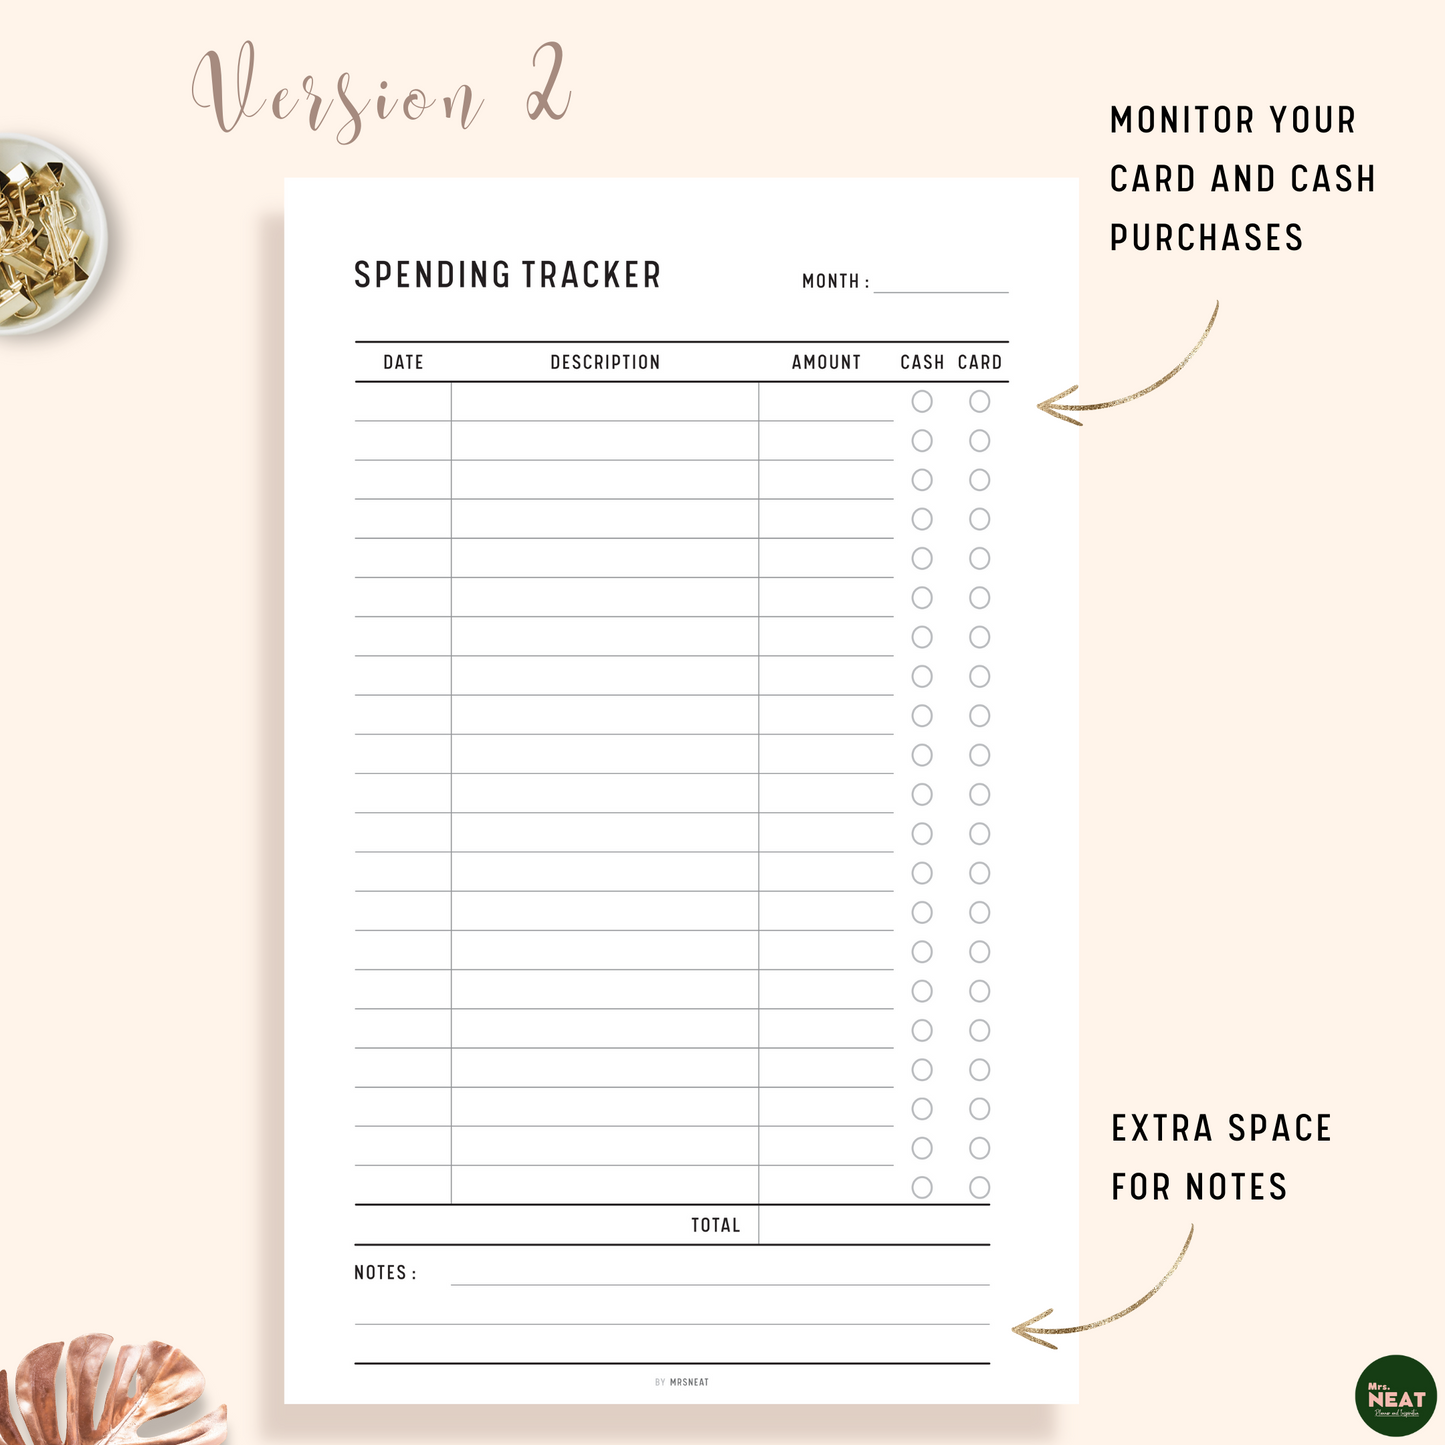 Spending Tracker Planner with room for date, description, amount, 2 payment options and notes